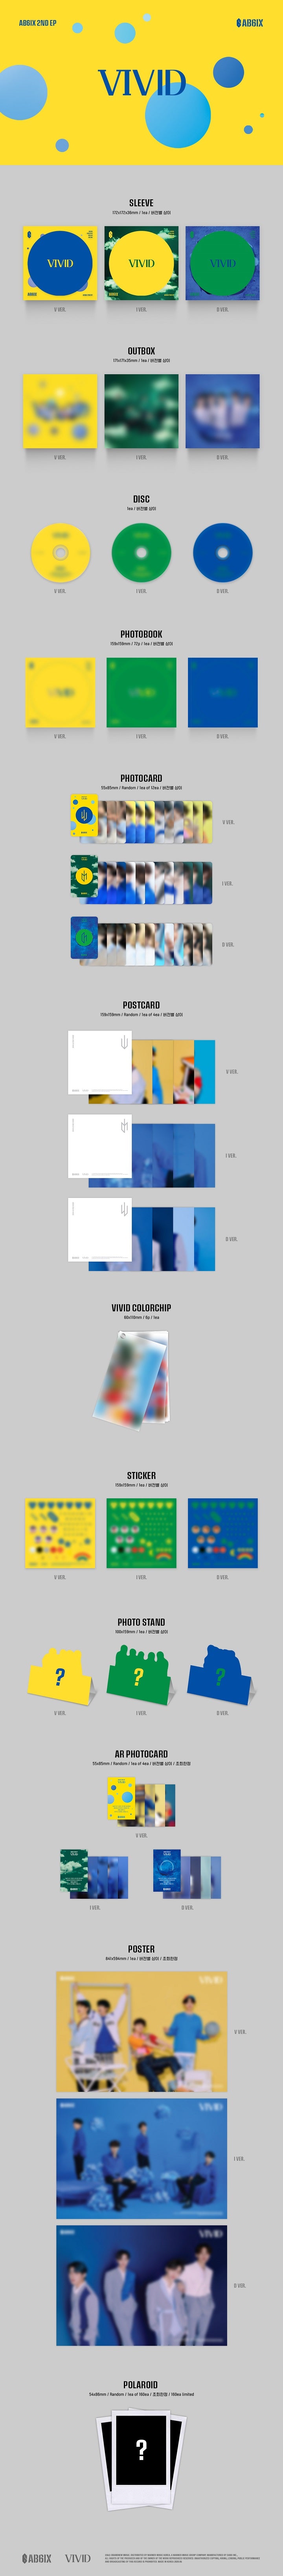 1 CD
1 Photo Book (80 pages)
1 Photo Card
1 Post
1 Colorship
1 Sticker
1 Photo Stand
1 AR Card